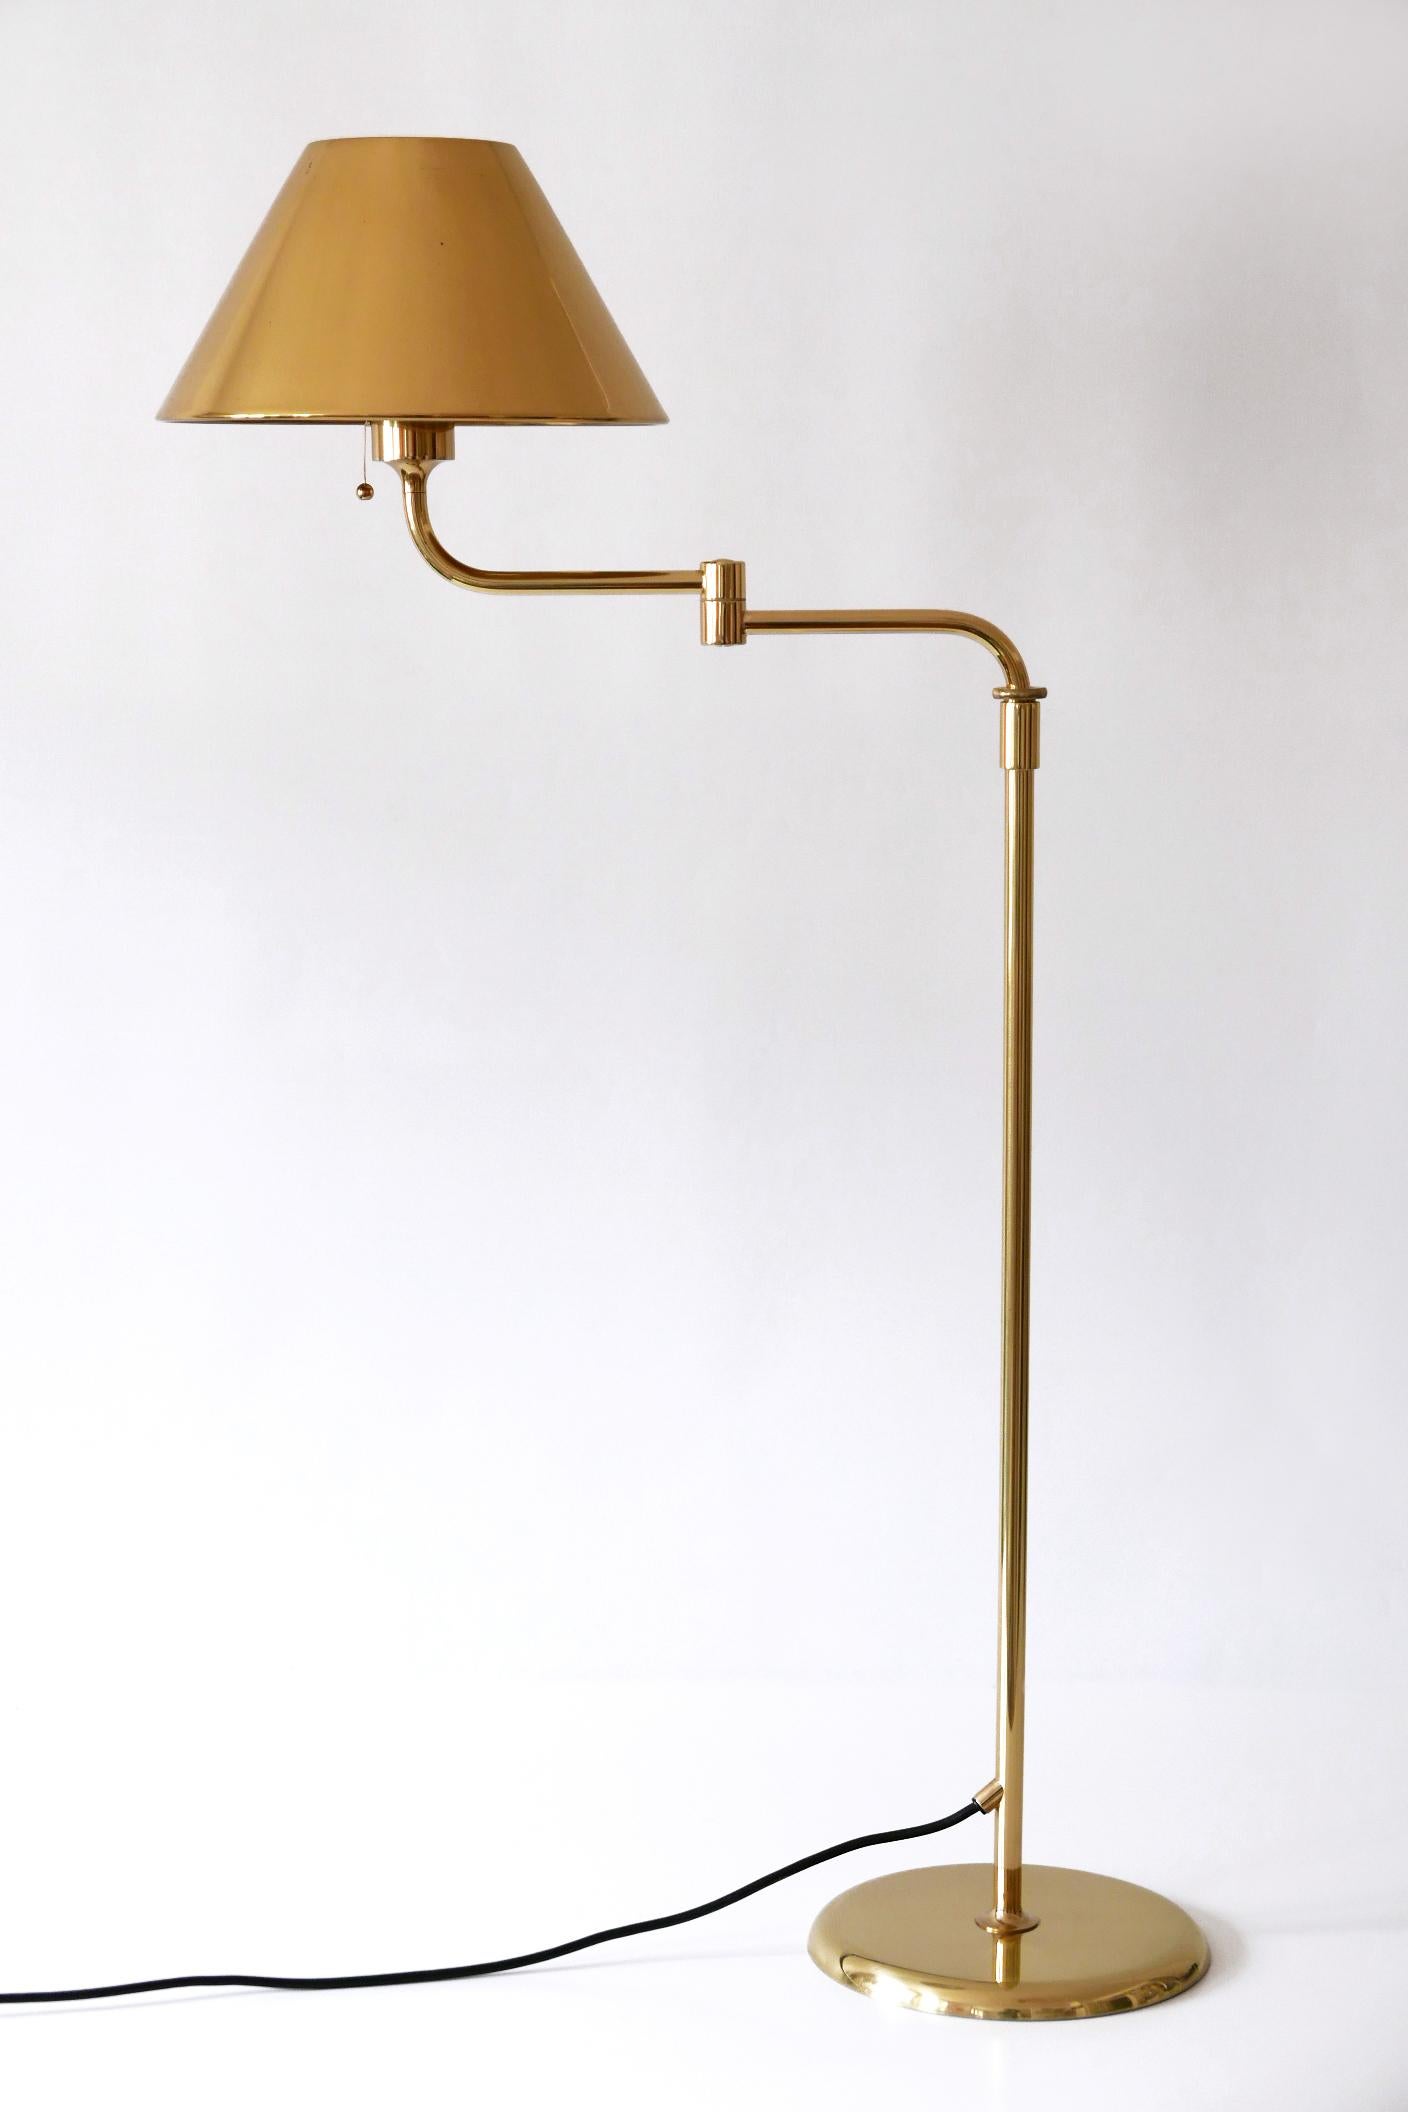 Articulated Brass Floor Lamp or Reading Light by Florian Schulz 1980s Germany 8